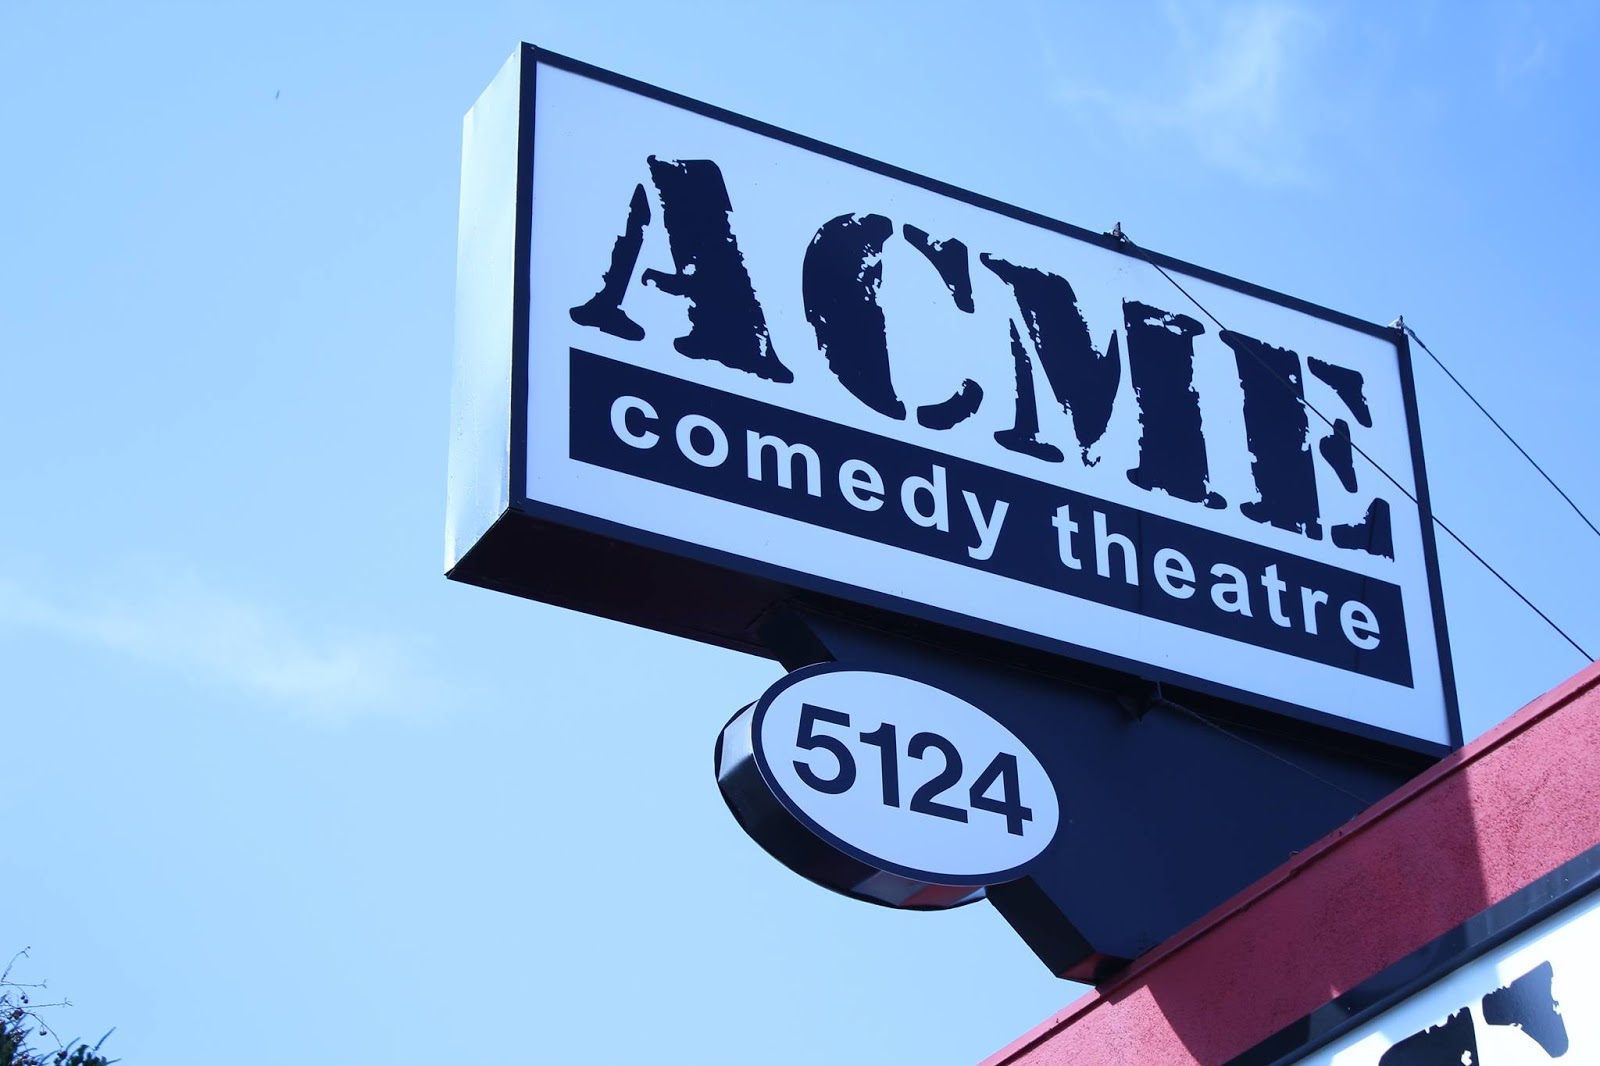 Member ACME Comedy in North Hollywood CA